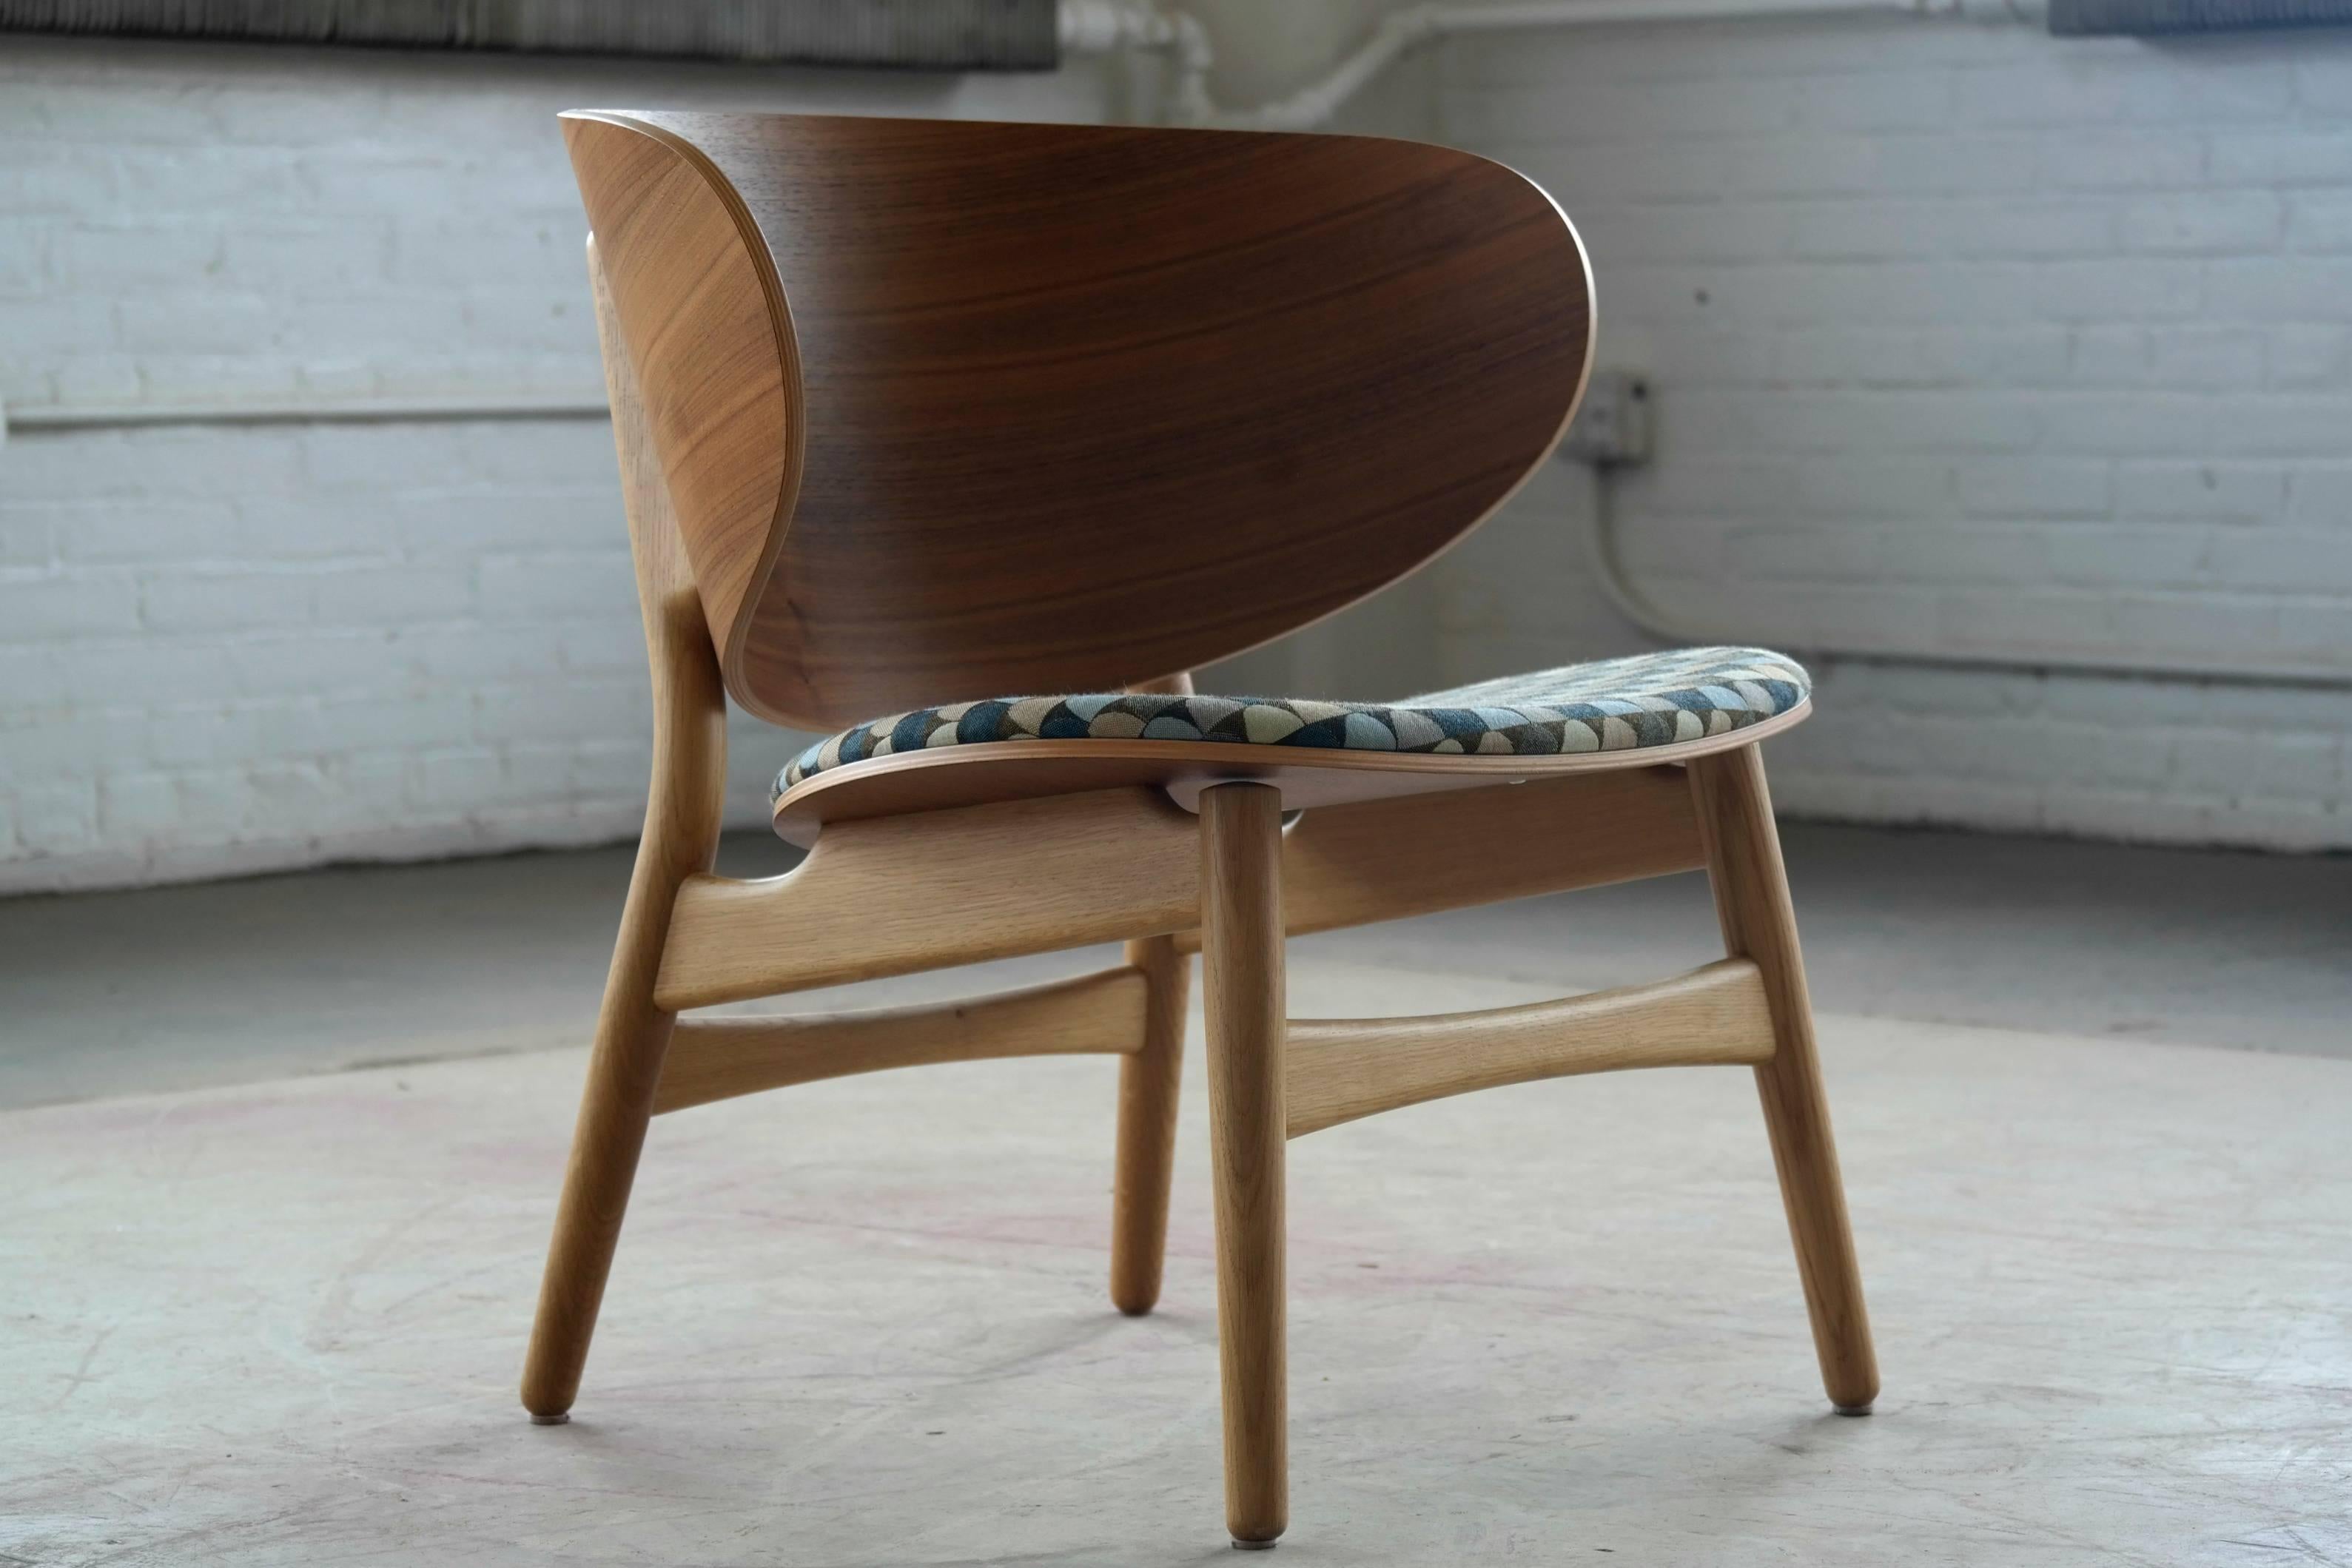 This fantastic shell chair with backrest and seat in walnut veneer on a base of soap treated oak is a 2015 re-issue by GETAMA of the Classic chair designed by Hans Wegner in 1948. While the original design had teak in the seat and back the use of